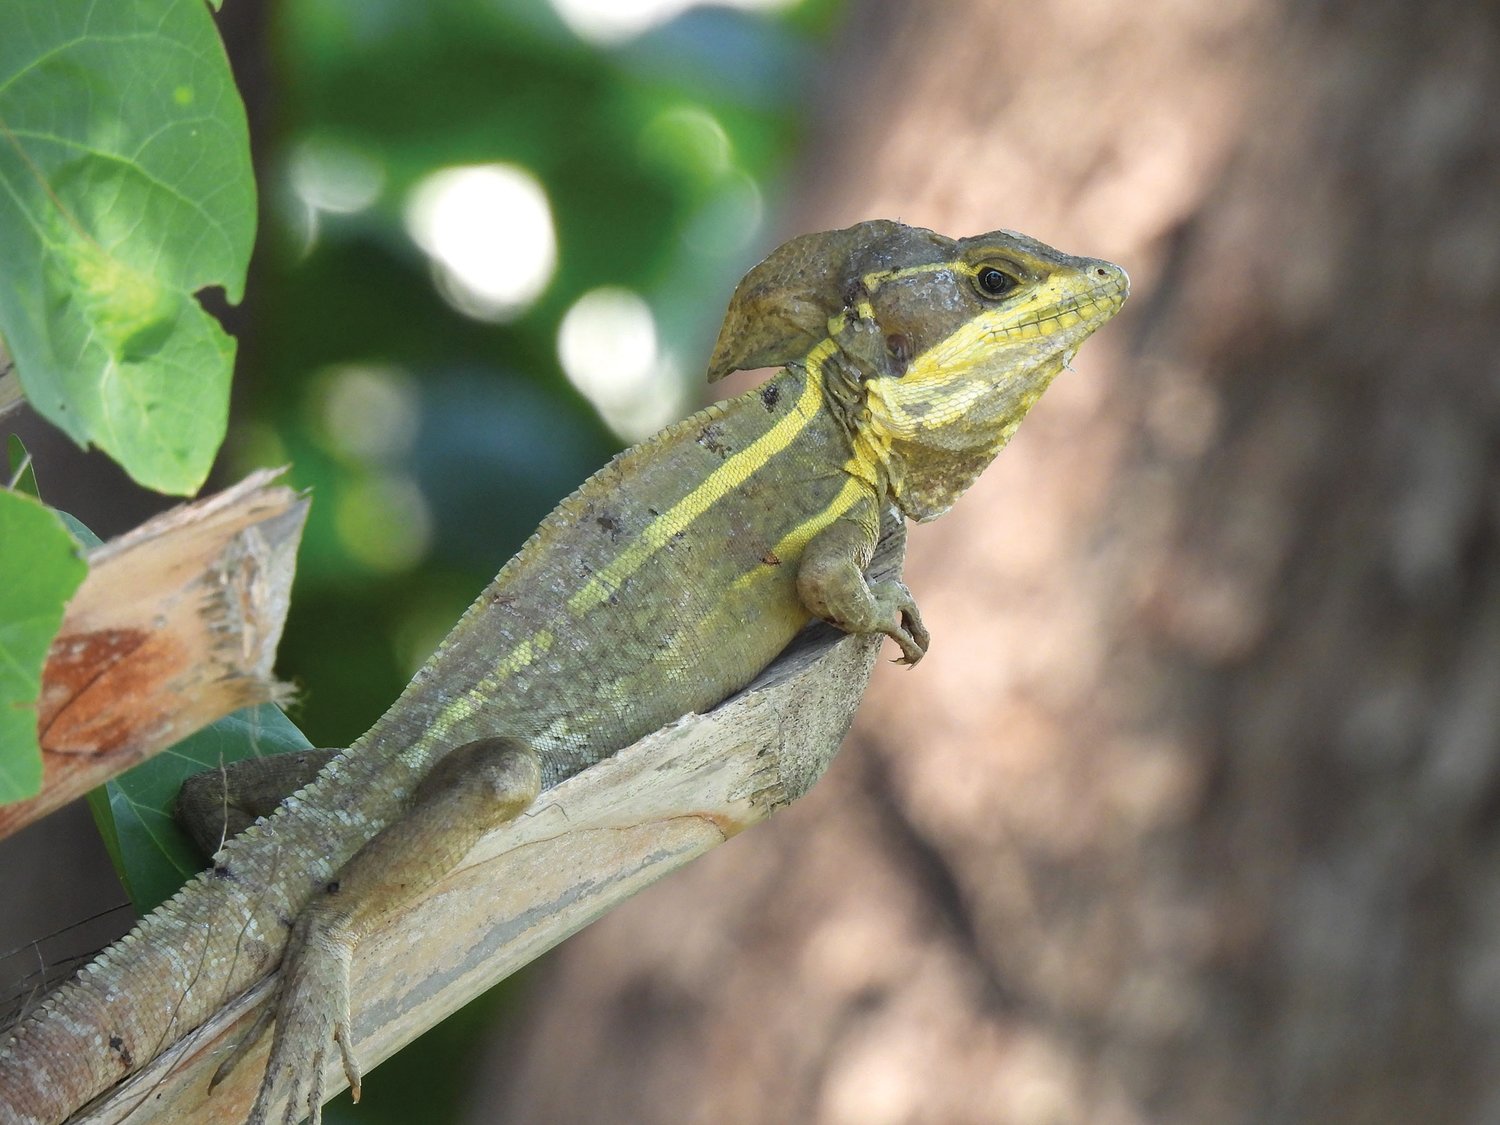 This nonnative brown basilisk was spotted in Clewiston. [Photo courtesy Steve Johnson]